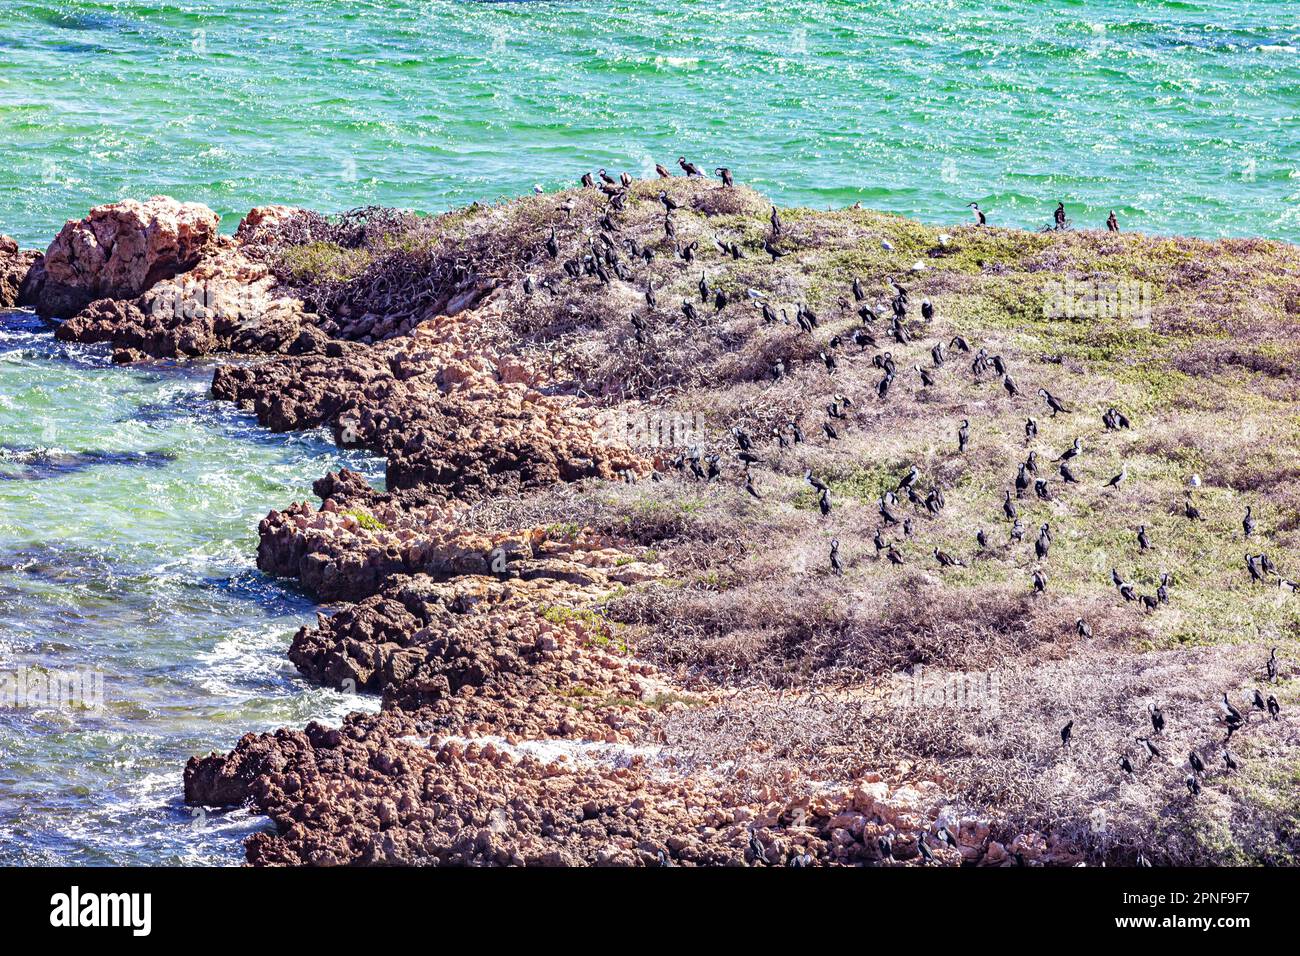 Flock of roosting pied cormorants on Eagle Island in the water of Denham Sound at Eagle Bluff in Shark bay o Western Australia, Australia. Stock Photo